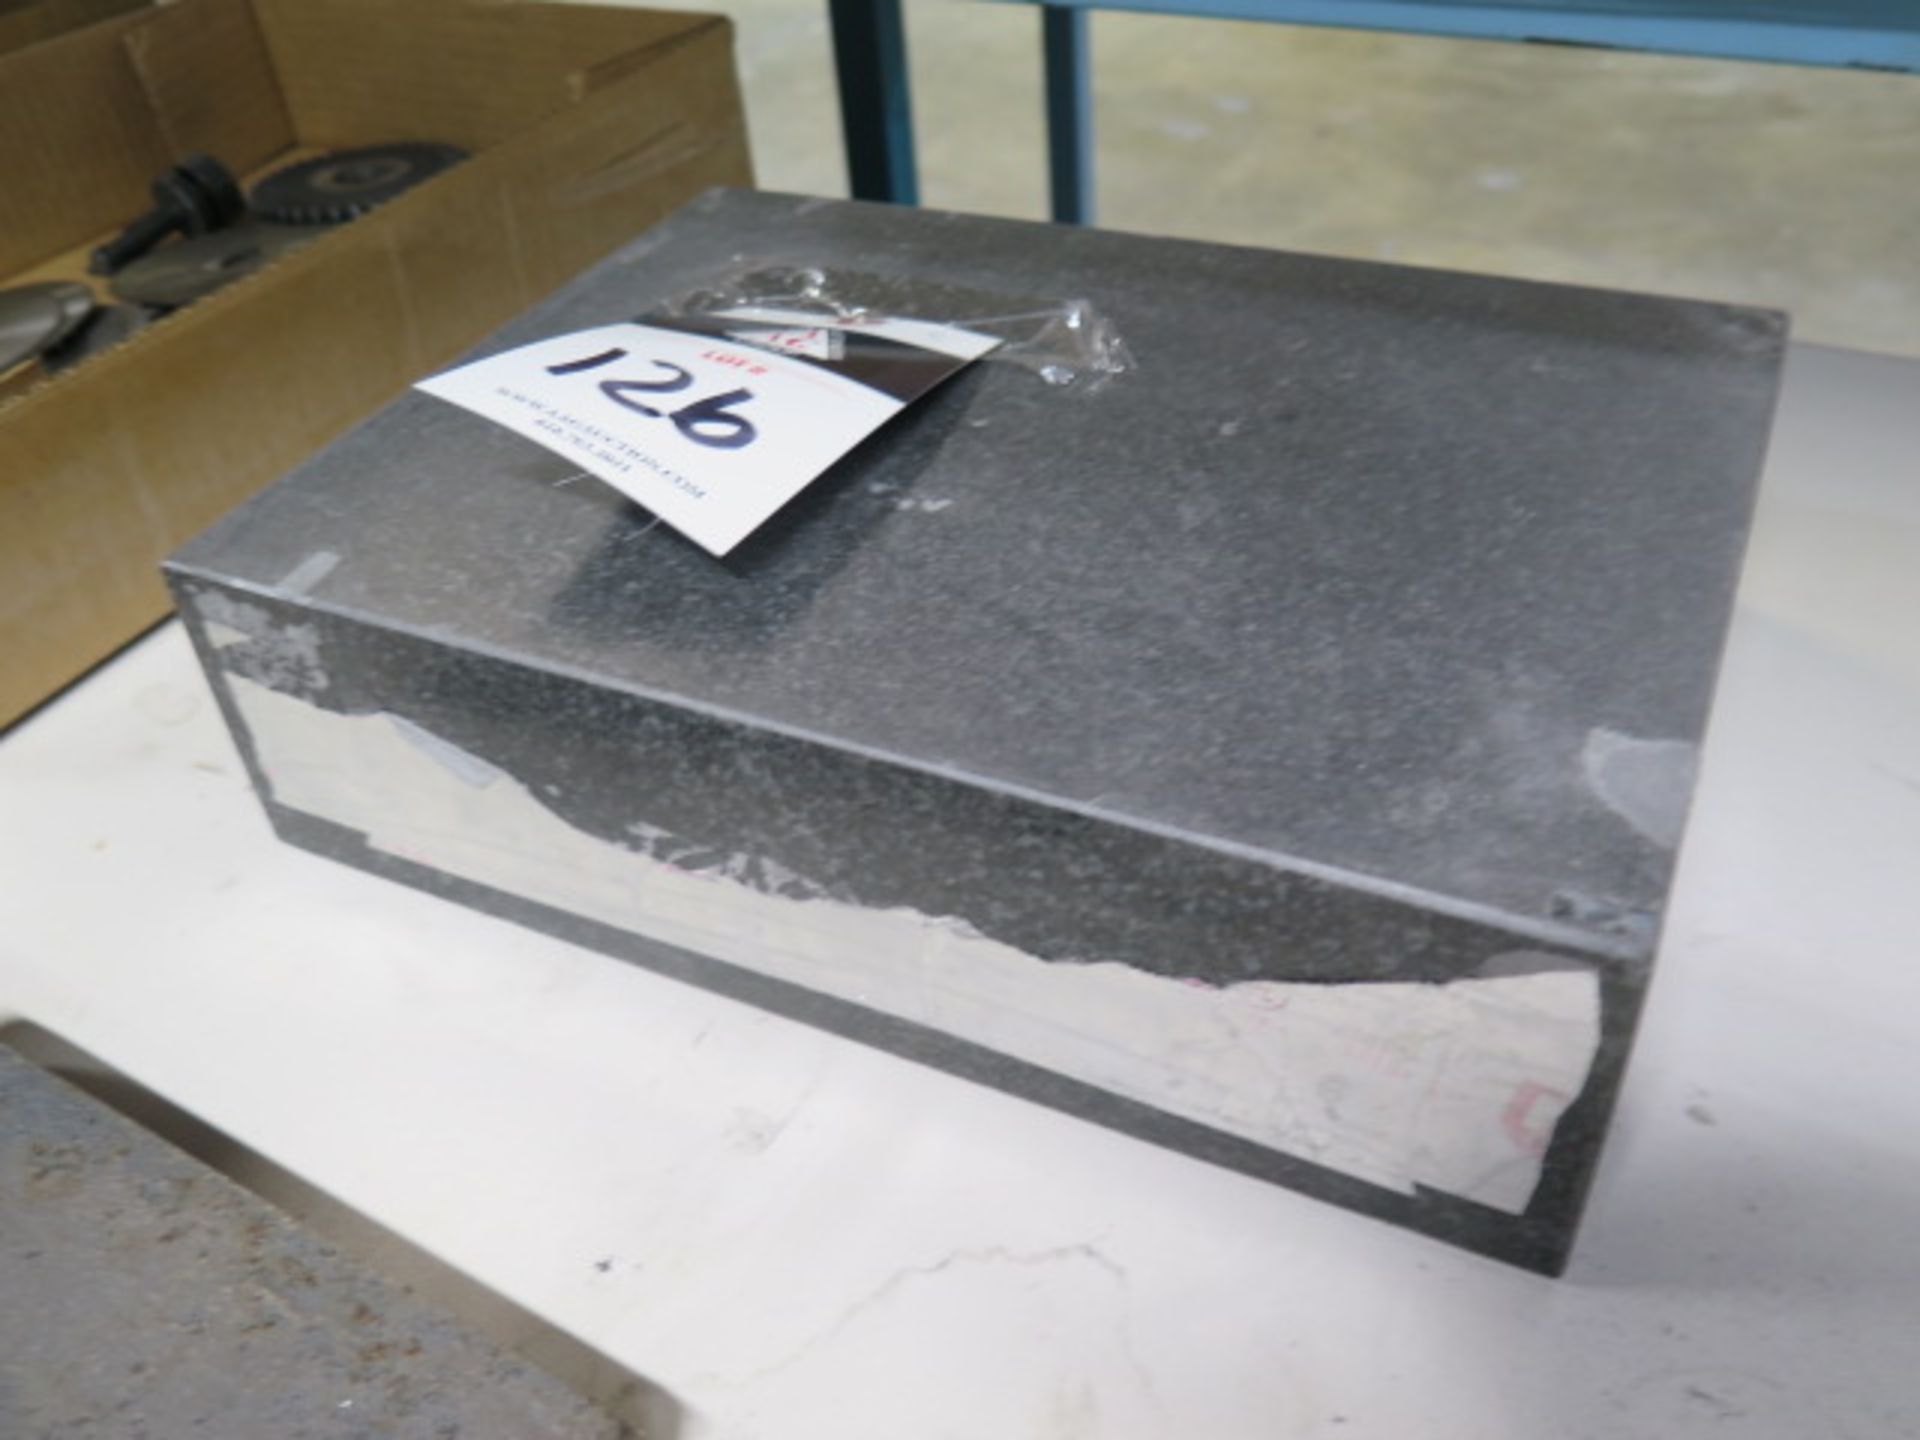 8" x 12" x 4" Granite Surface Plate (SOLD AS-IS - NO WARRANTY) - Image 2 of 2